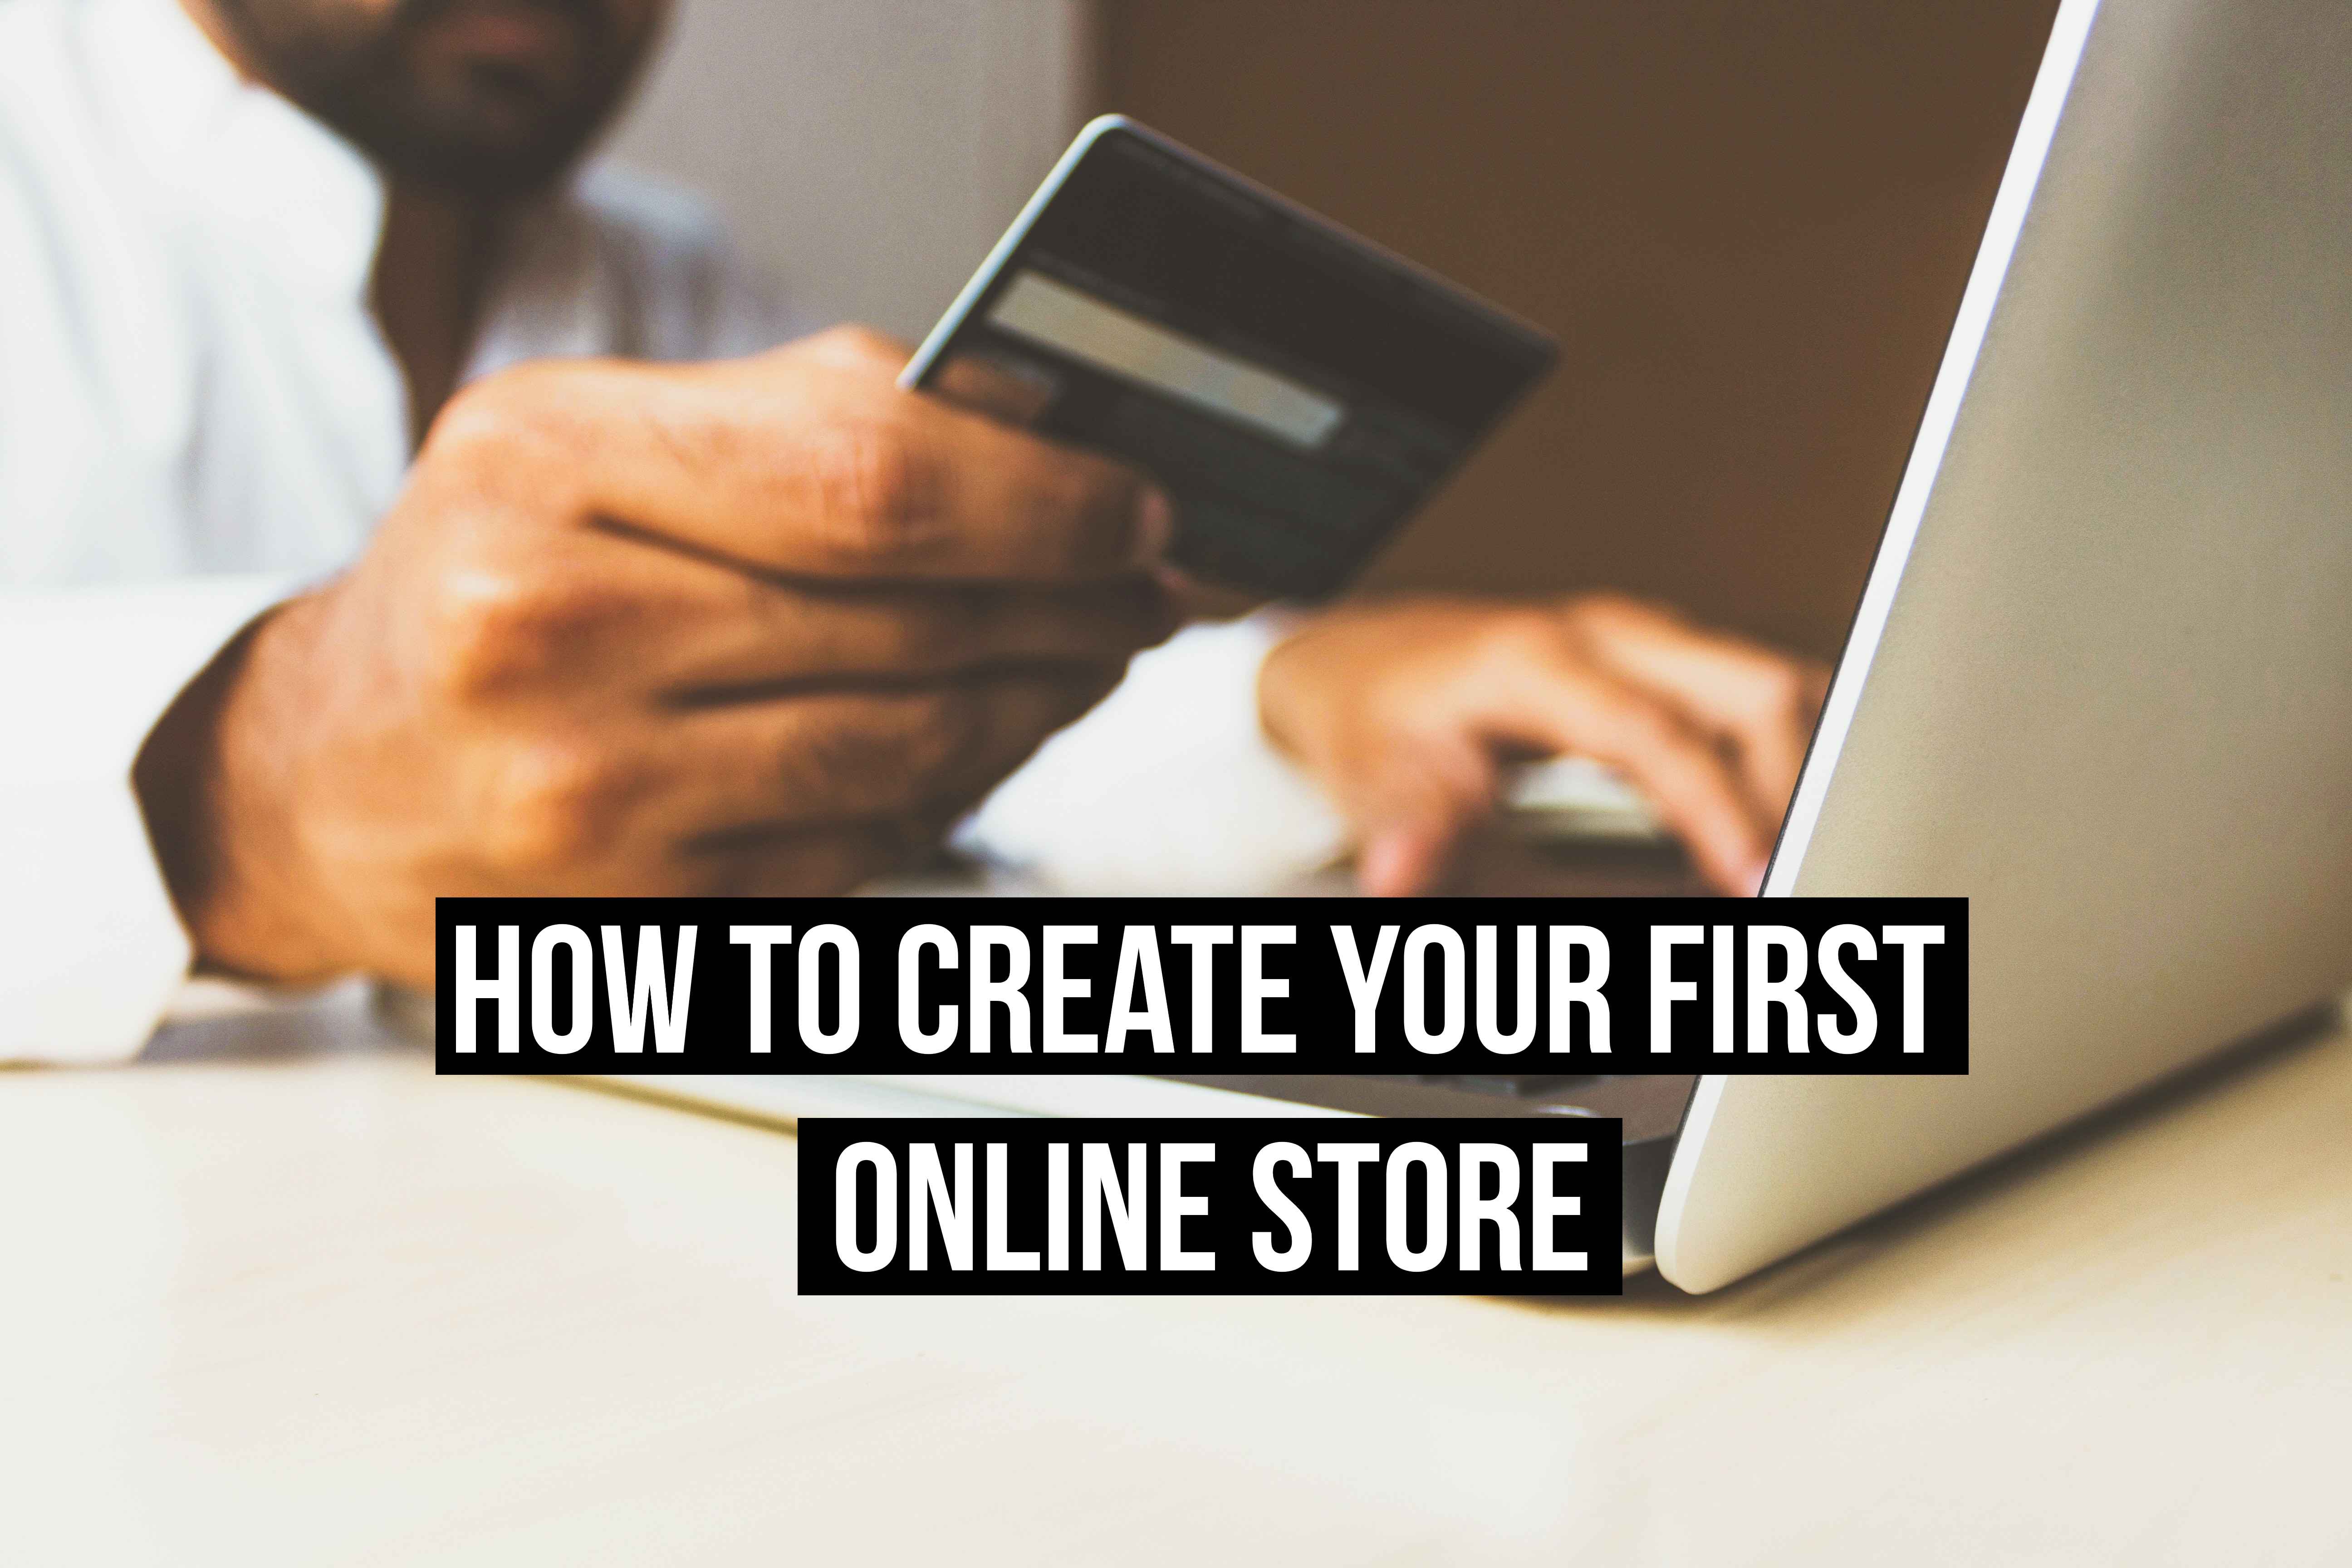 how to create your first online store title image